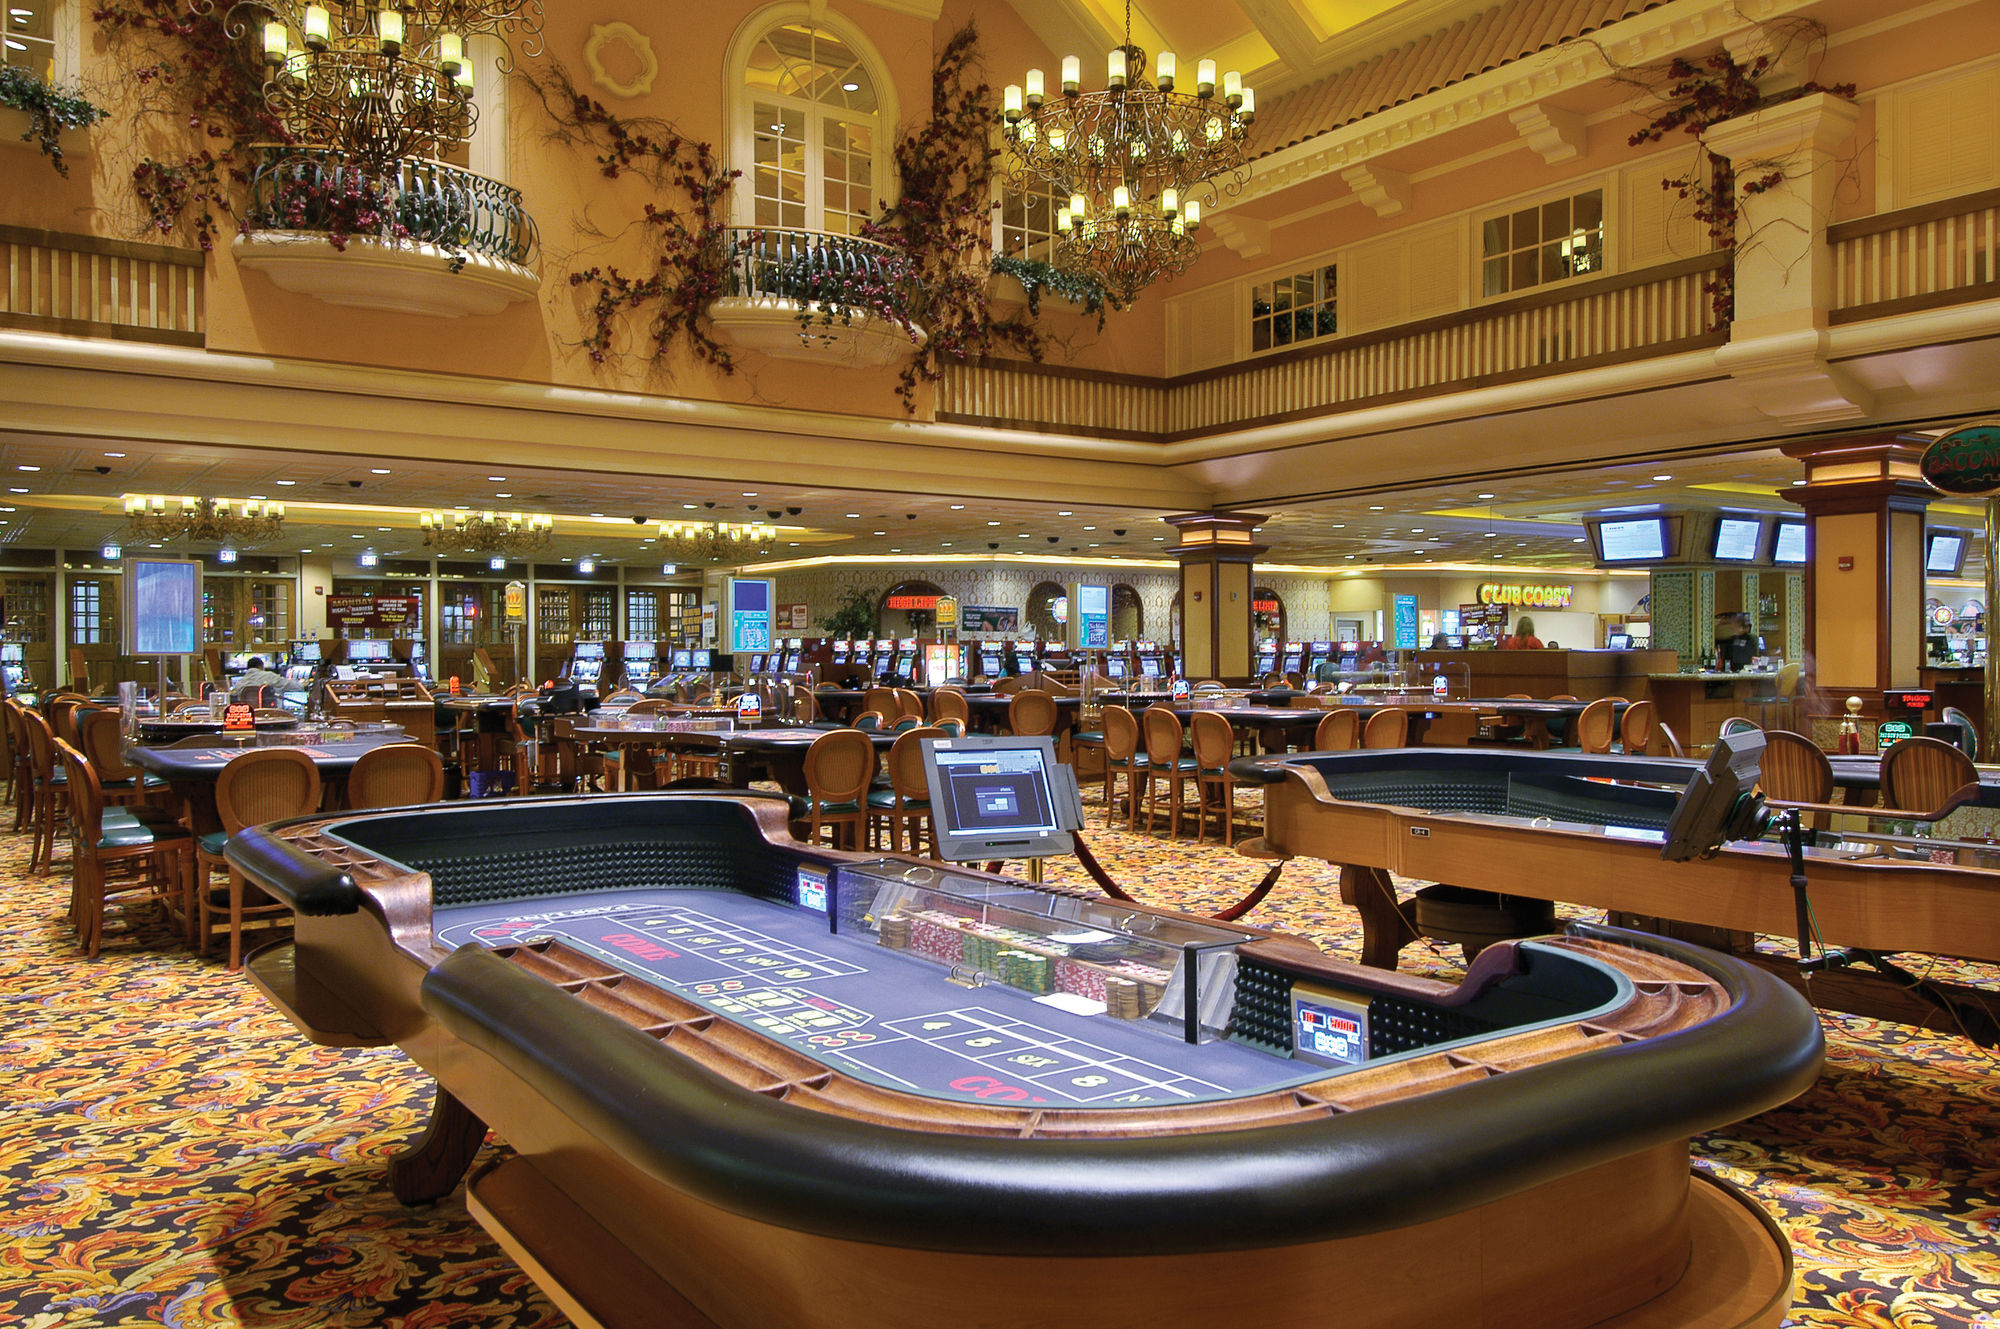 Inside Extravagance: An Exploration of the Worlds Most Luxurious Hotel-Casinos